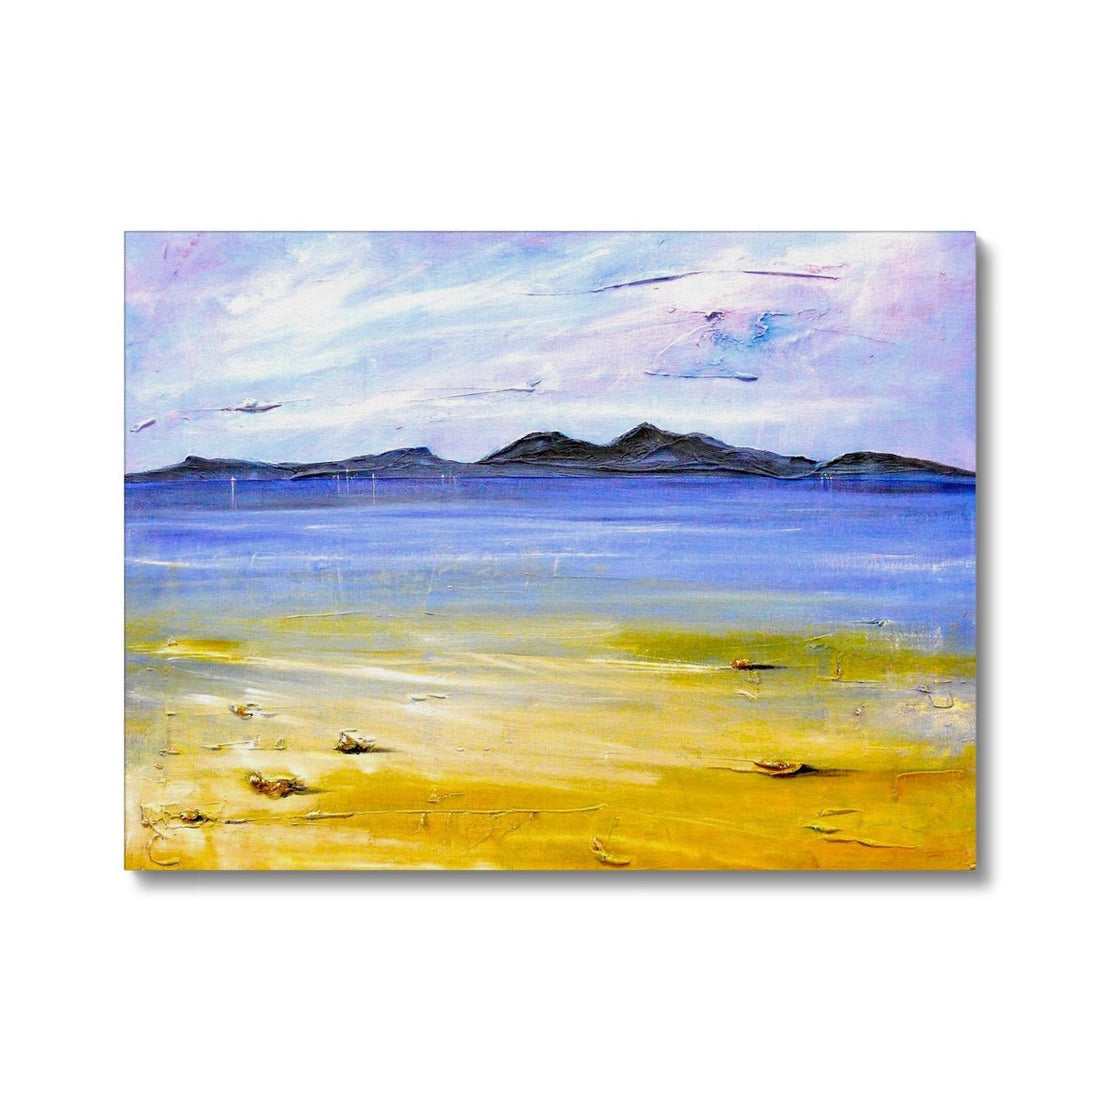 Camusdarach Beach Arisaig Painting | Canvas | Paintings from Scotland by Scottish Artist Hunter